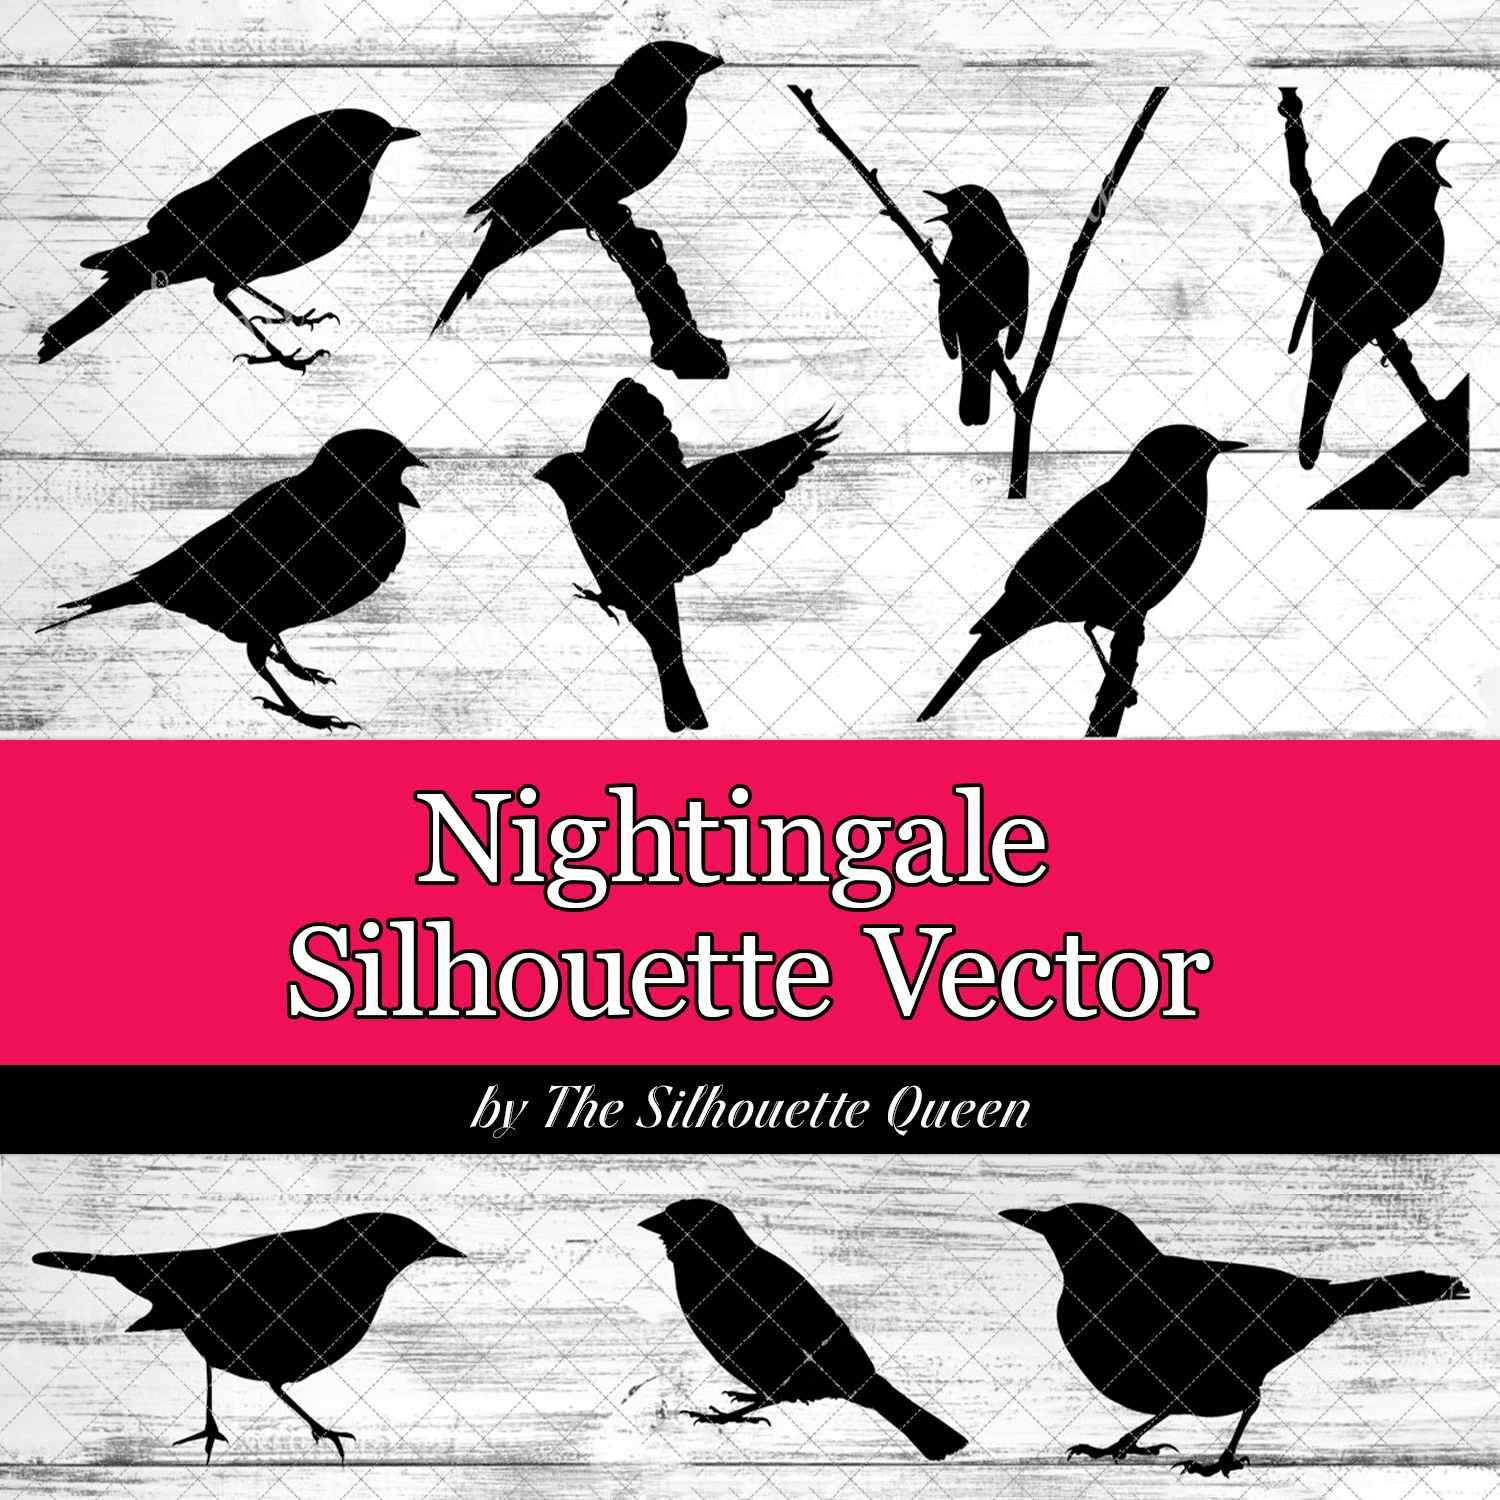 Nightingale Silhouette Vector cover.